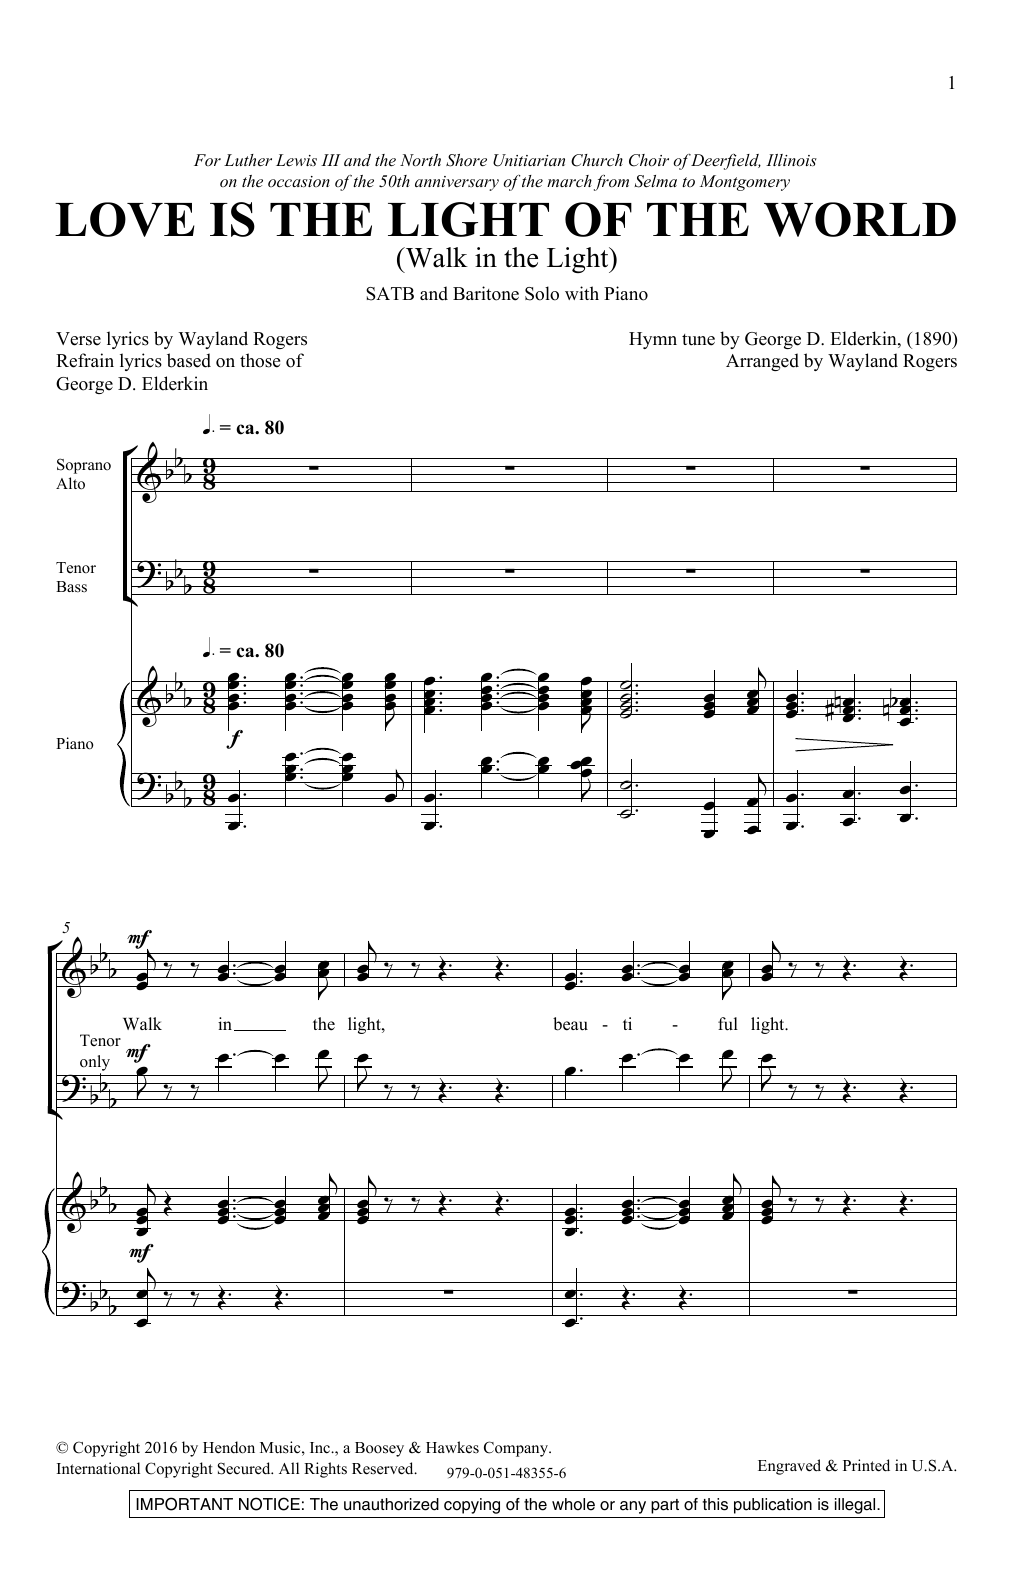 Download Wayland Rogers Love Is The Light Of The World Sheet Music